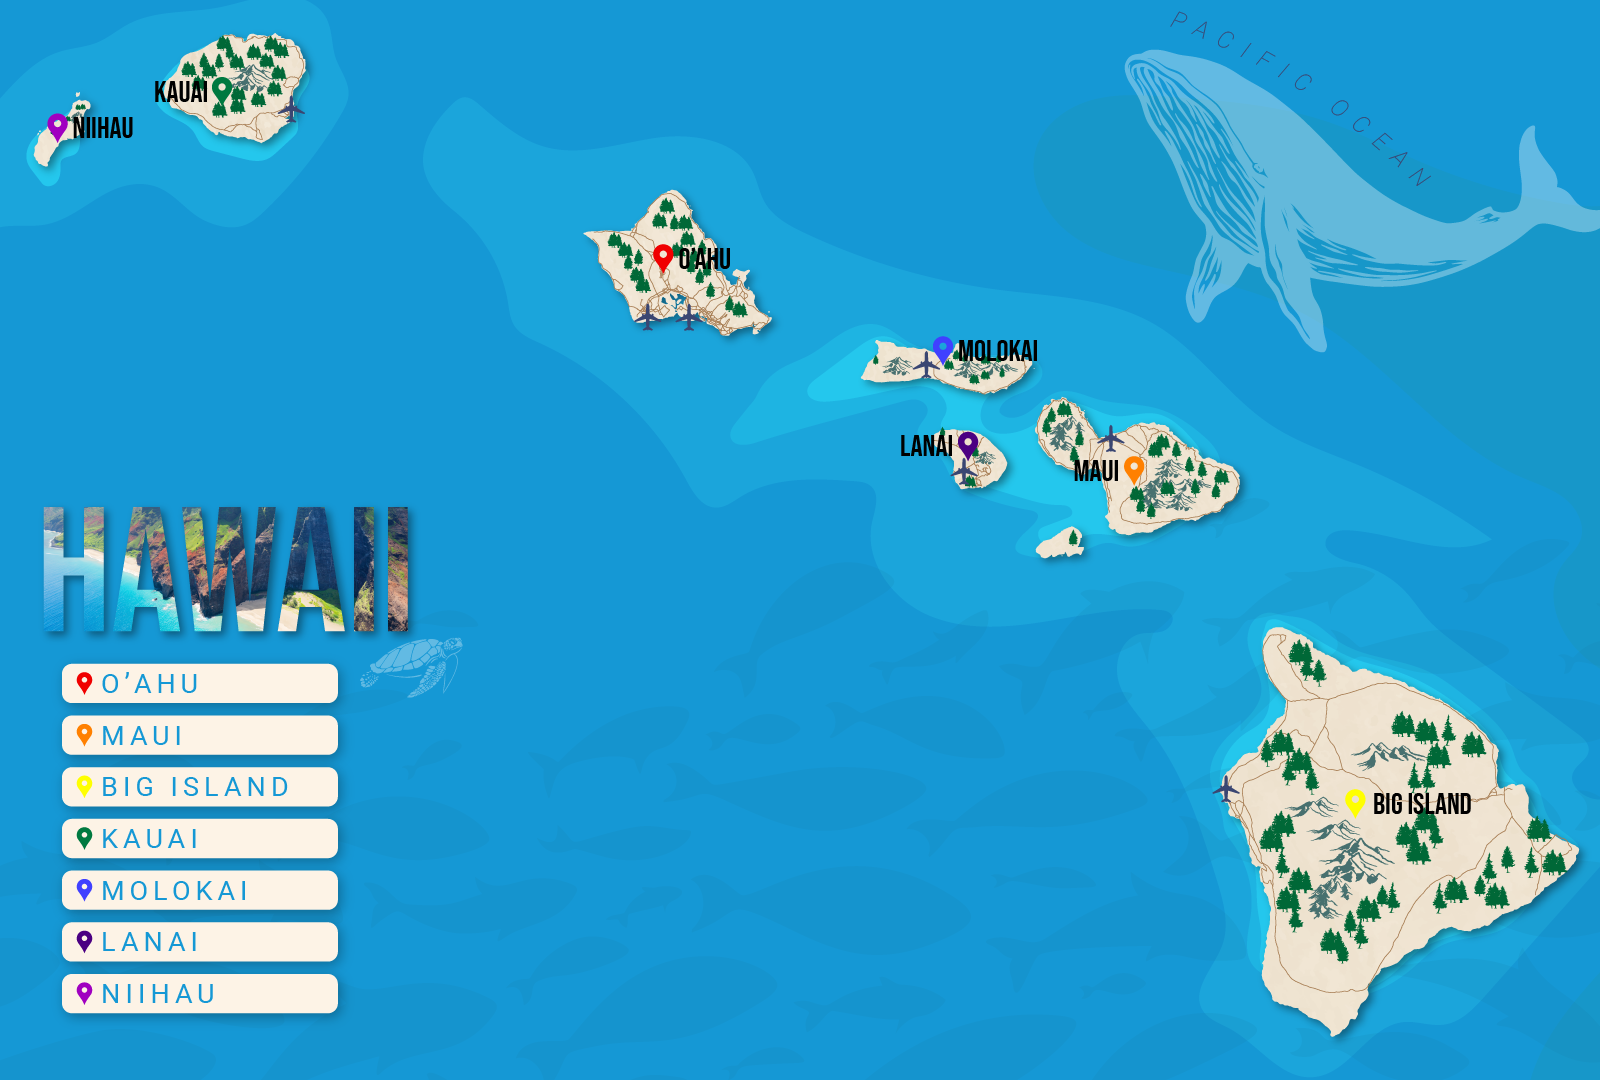 Custom map of the Hawaiian islands in graphic form with the 7 islands labeled